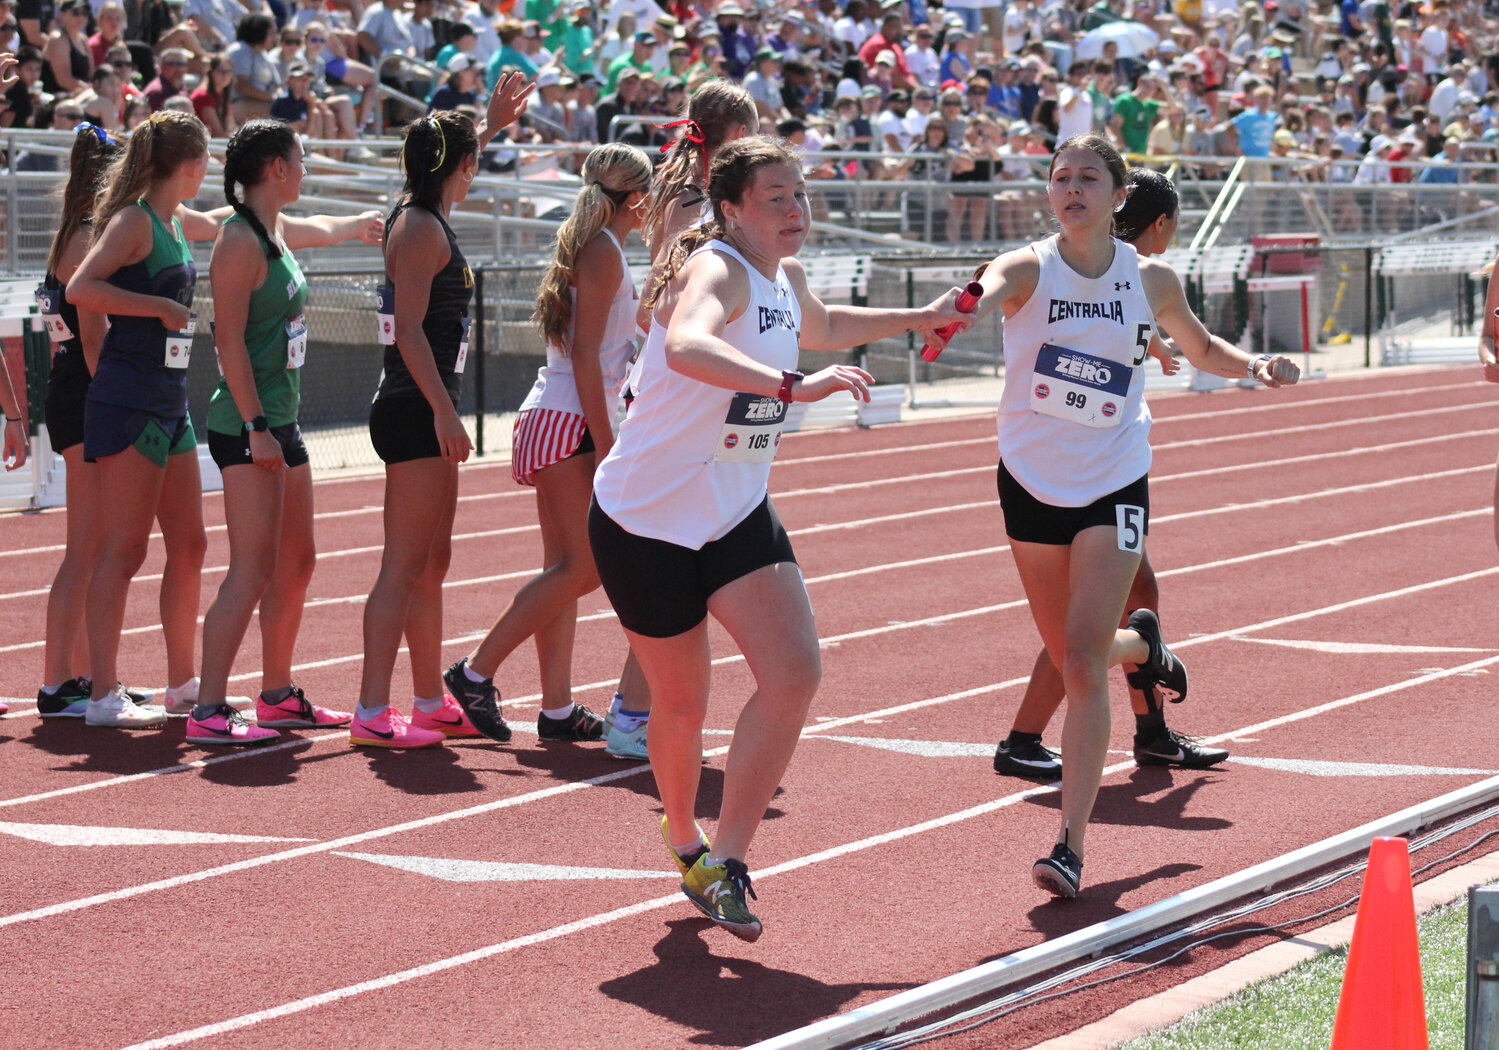 Centralia senior Annie Robinson takes the handoff from freshman Becca Erisman in the girls 4x800 relay on Friday in the Class 3 state track and field meet.